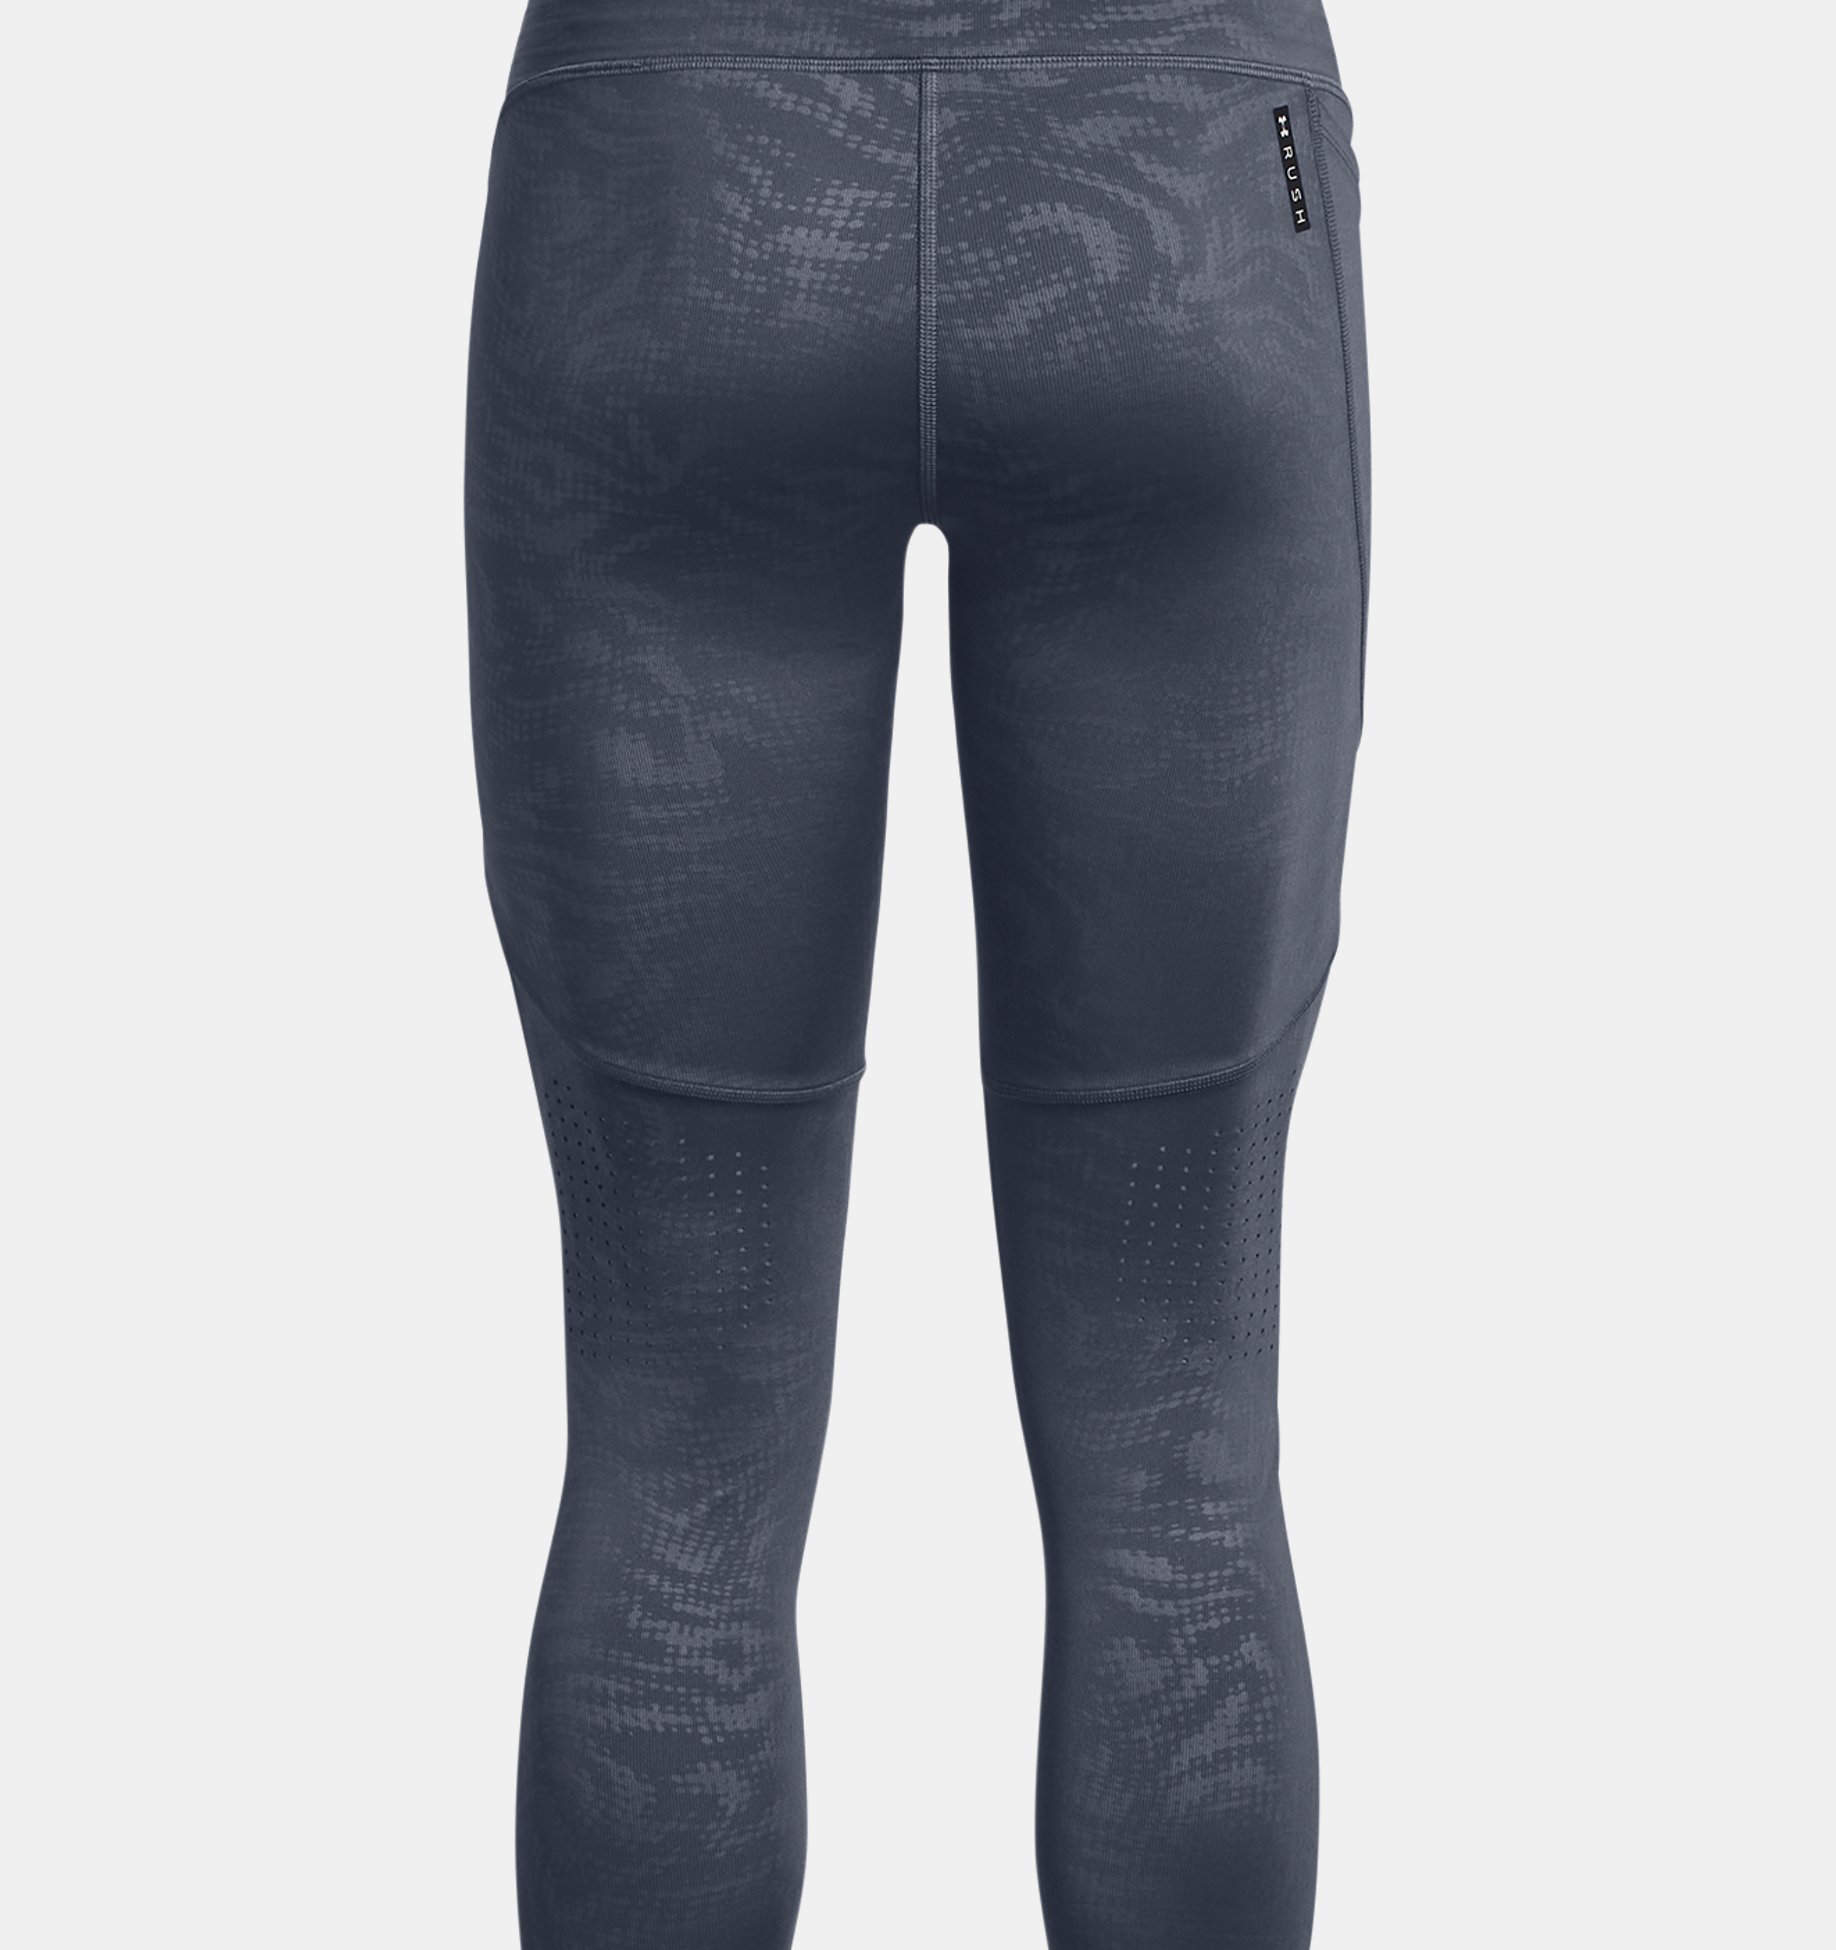 SMALL SIZES CLEAROUT Under Armour RUSH EMBOSSED - Leggings - Women's -  black - Private Sport Shop